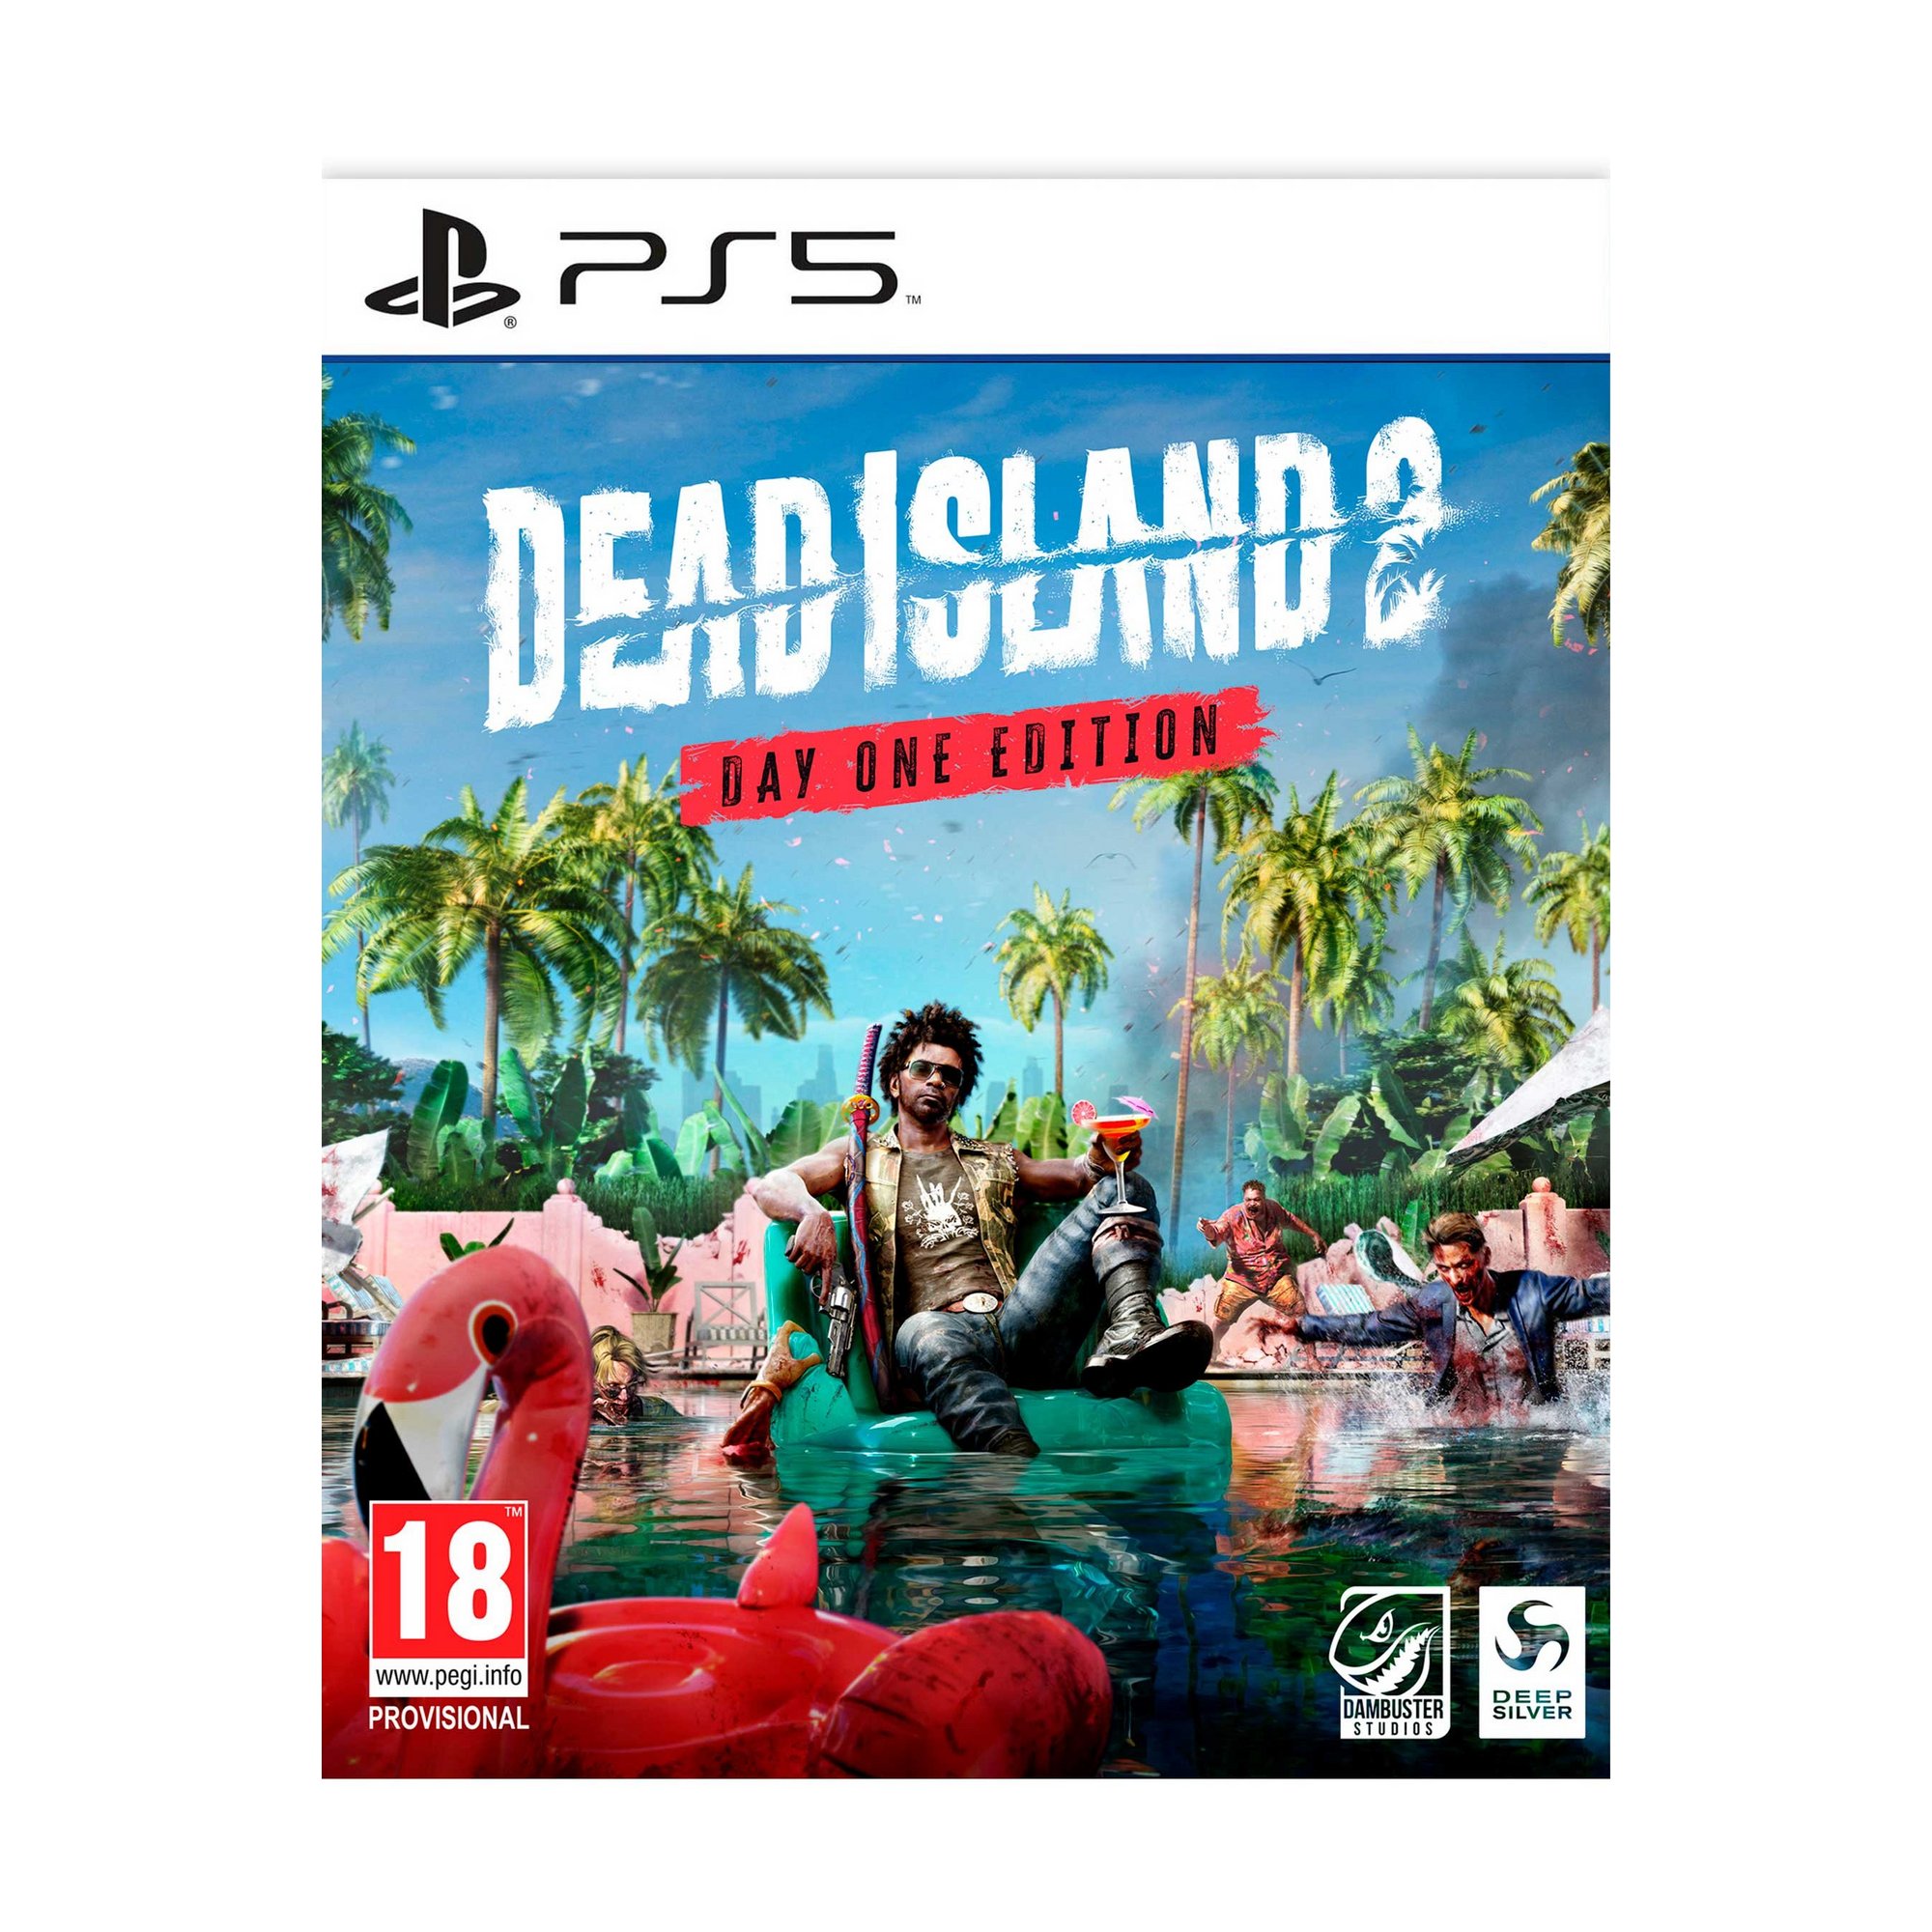 Sony PS5: PRE ORDER Dead Island 2 - Day One Edition